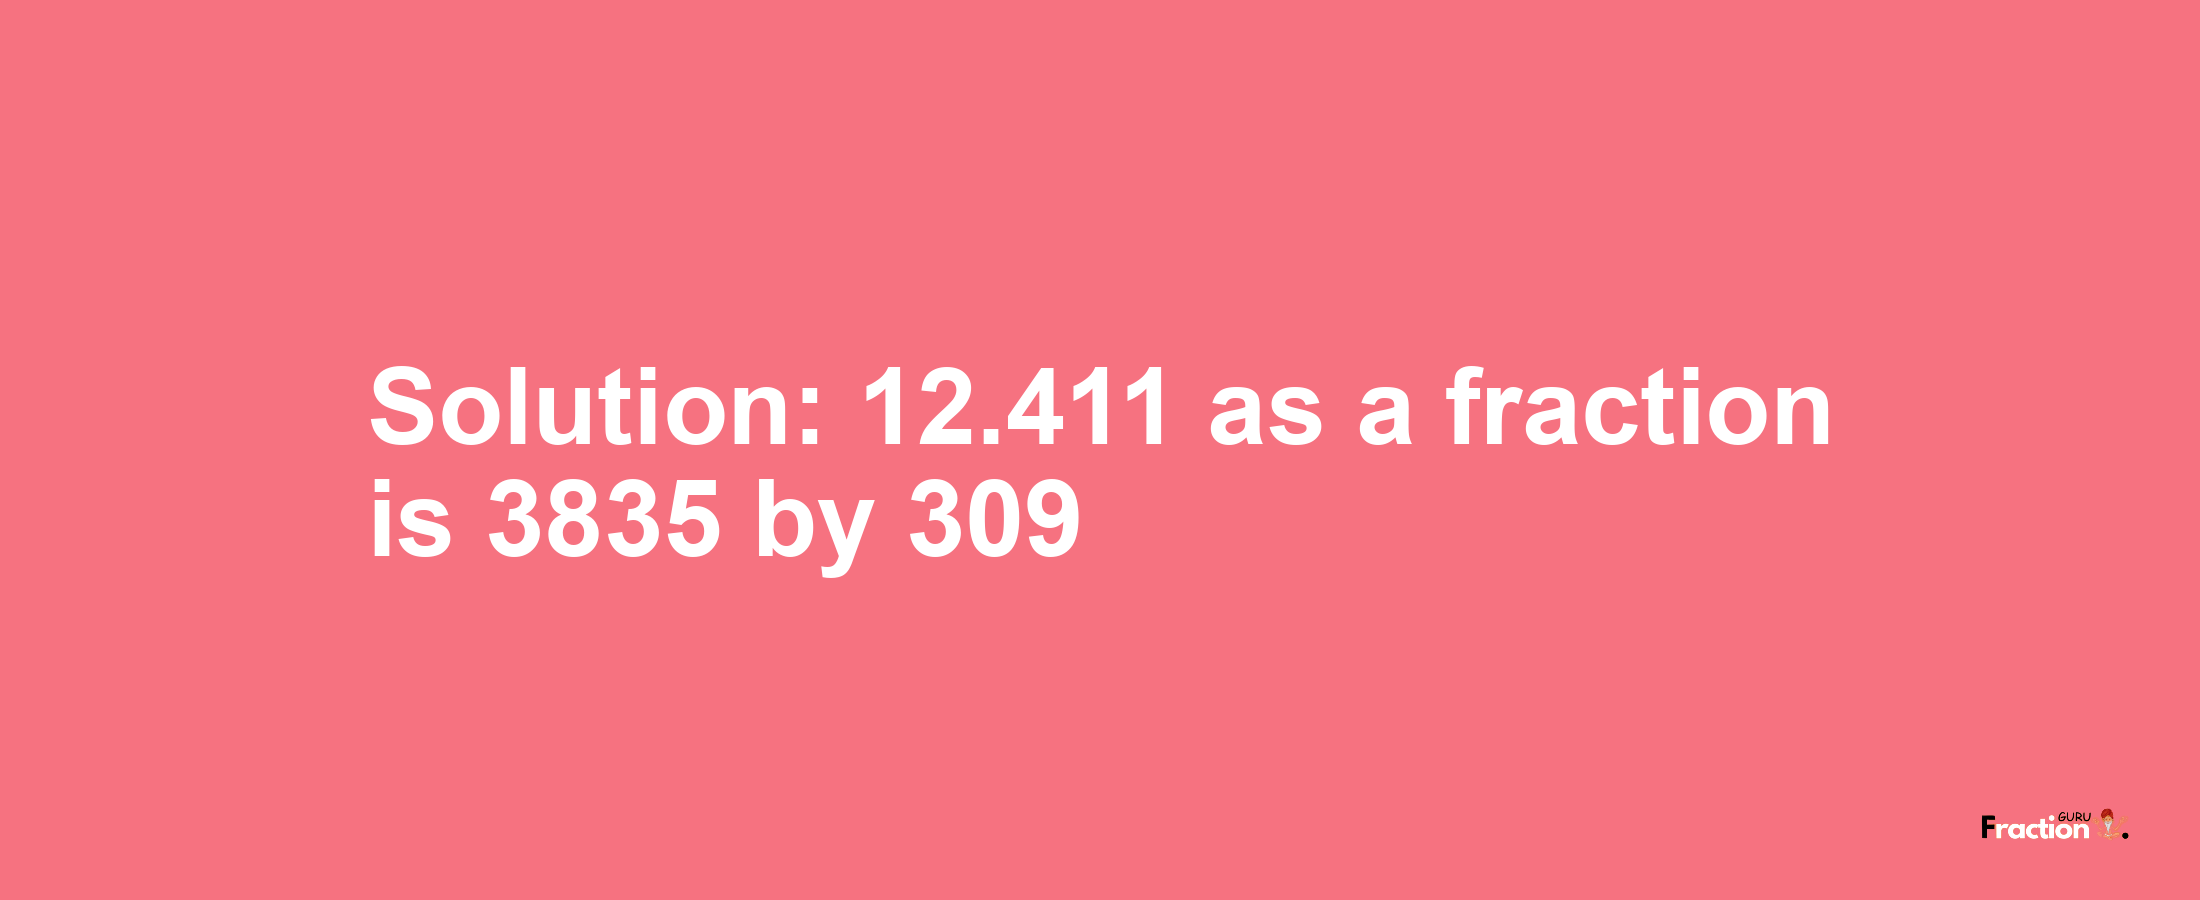 Solution:12.411 as a fraction is 3835/309